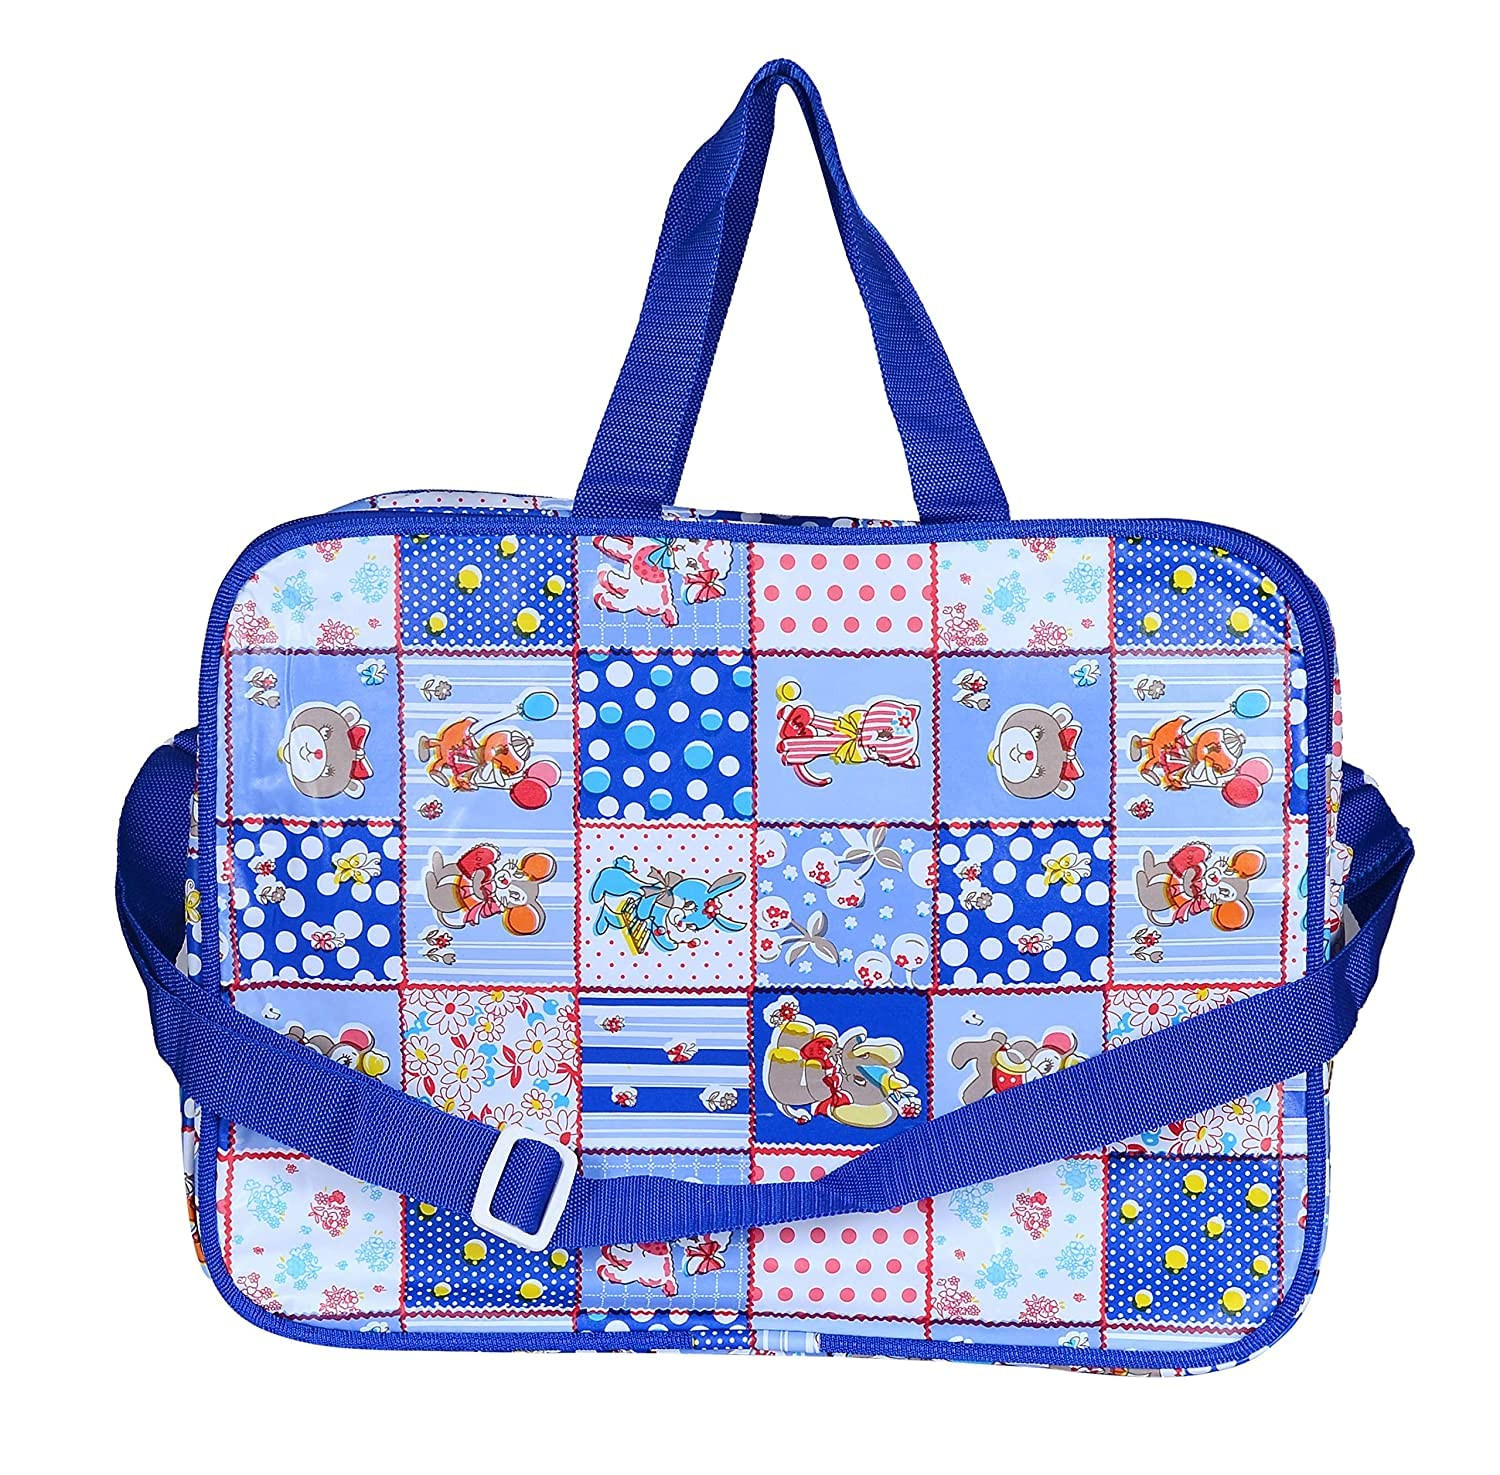 Kuber Industries PVC Multiuses Teddy Print Mothers Bag/Diapers Bag With Handle For Traveling, storing (Blue)